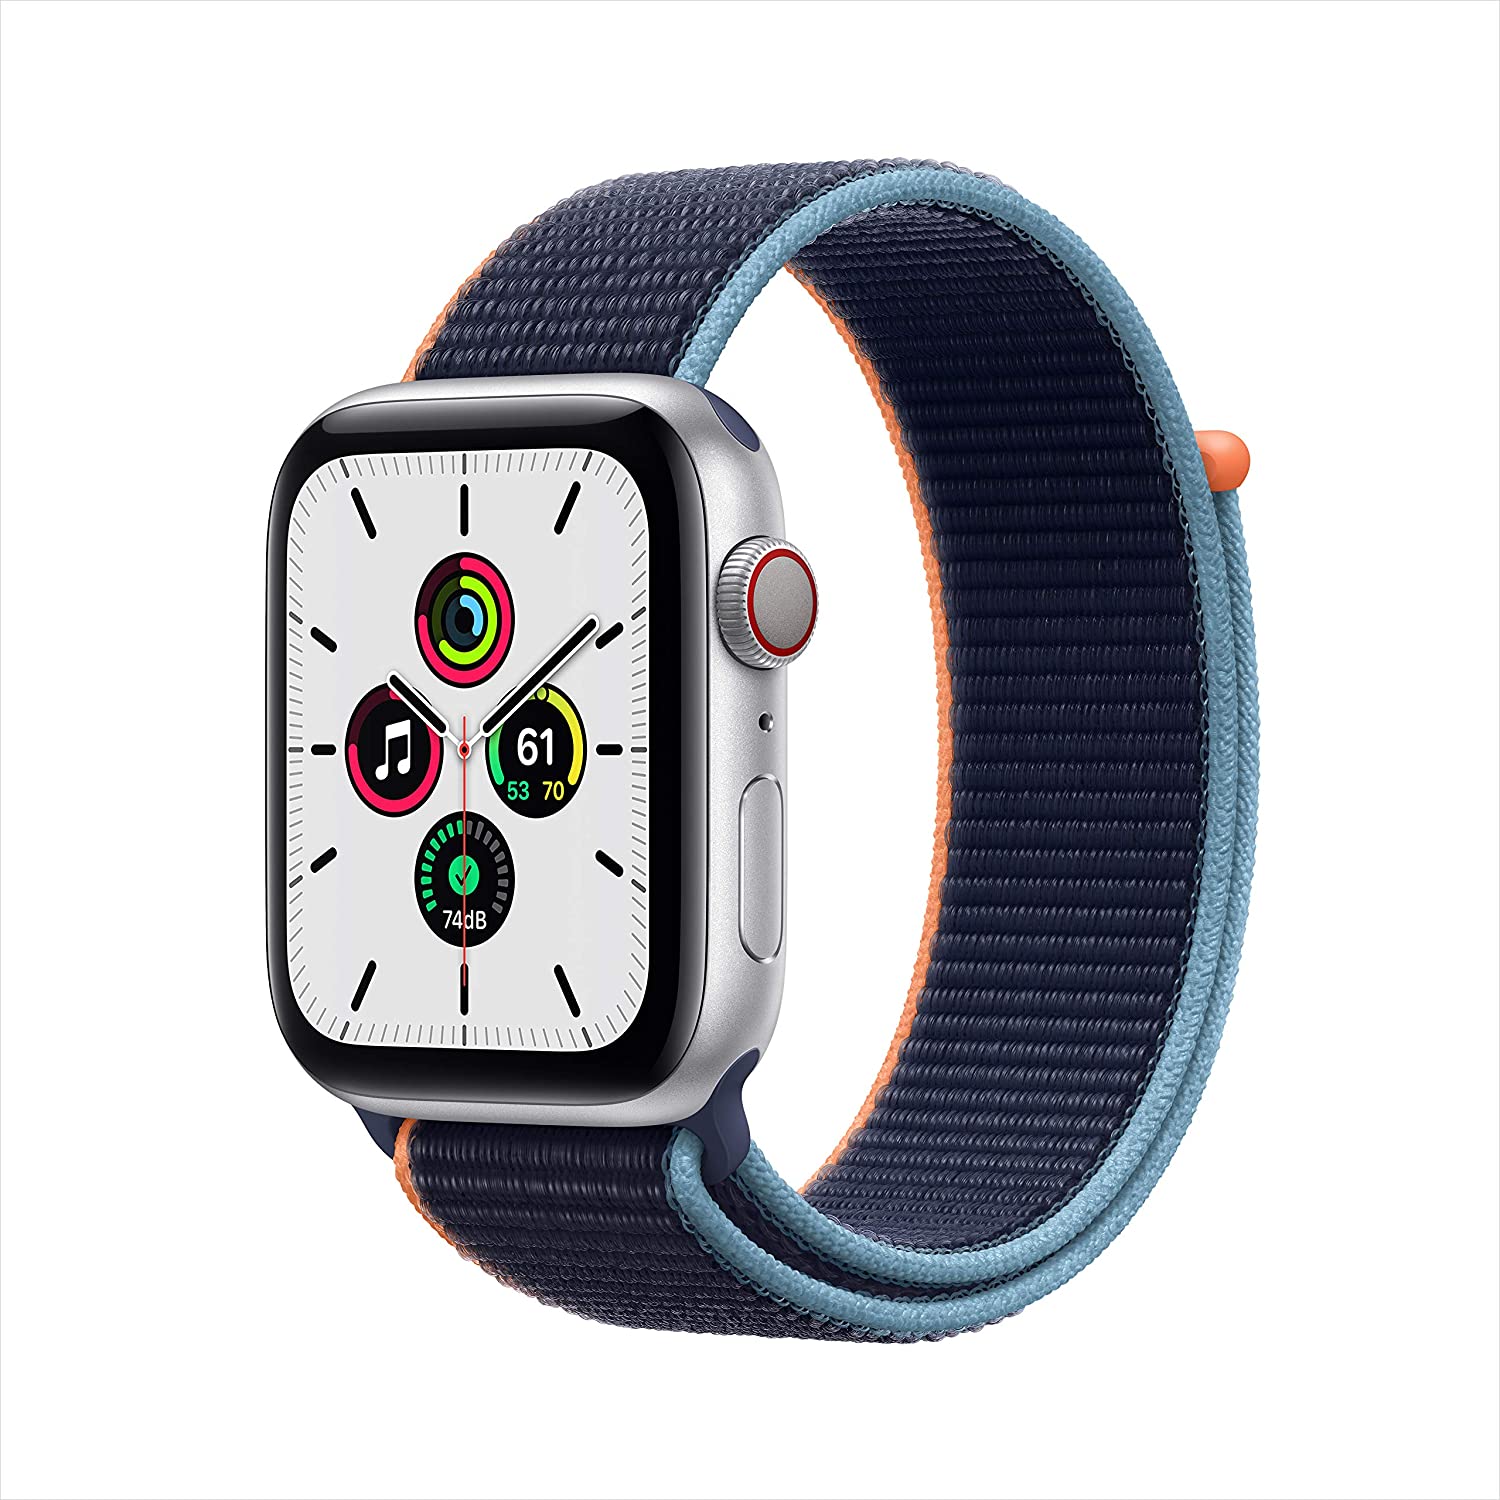 Apple Watch SE (44mm) (Cellular) Specifications-Features and Price 